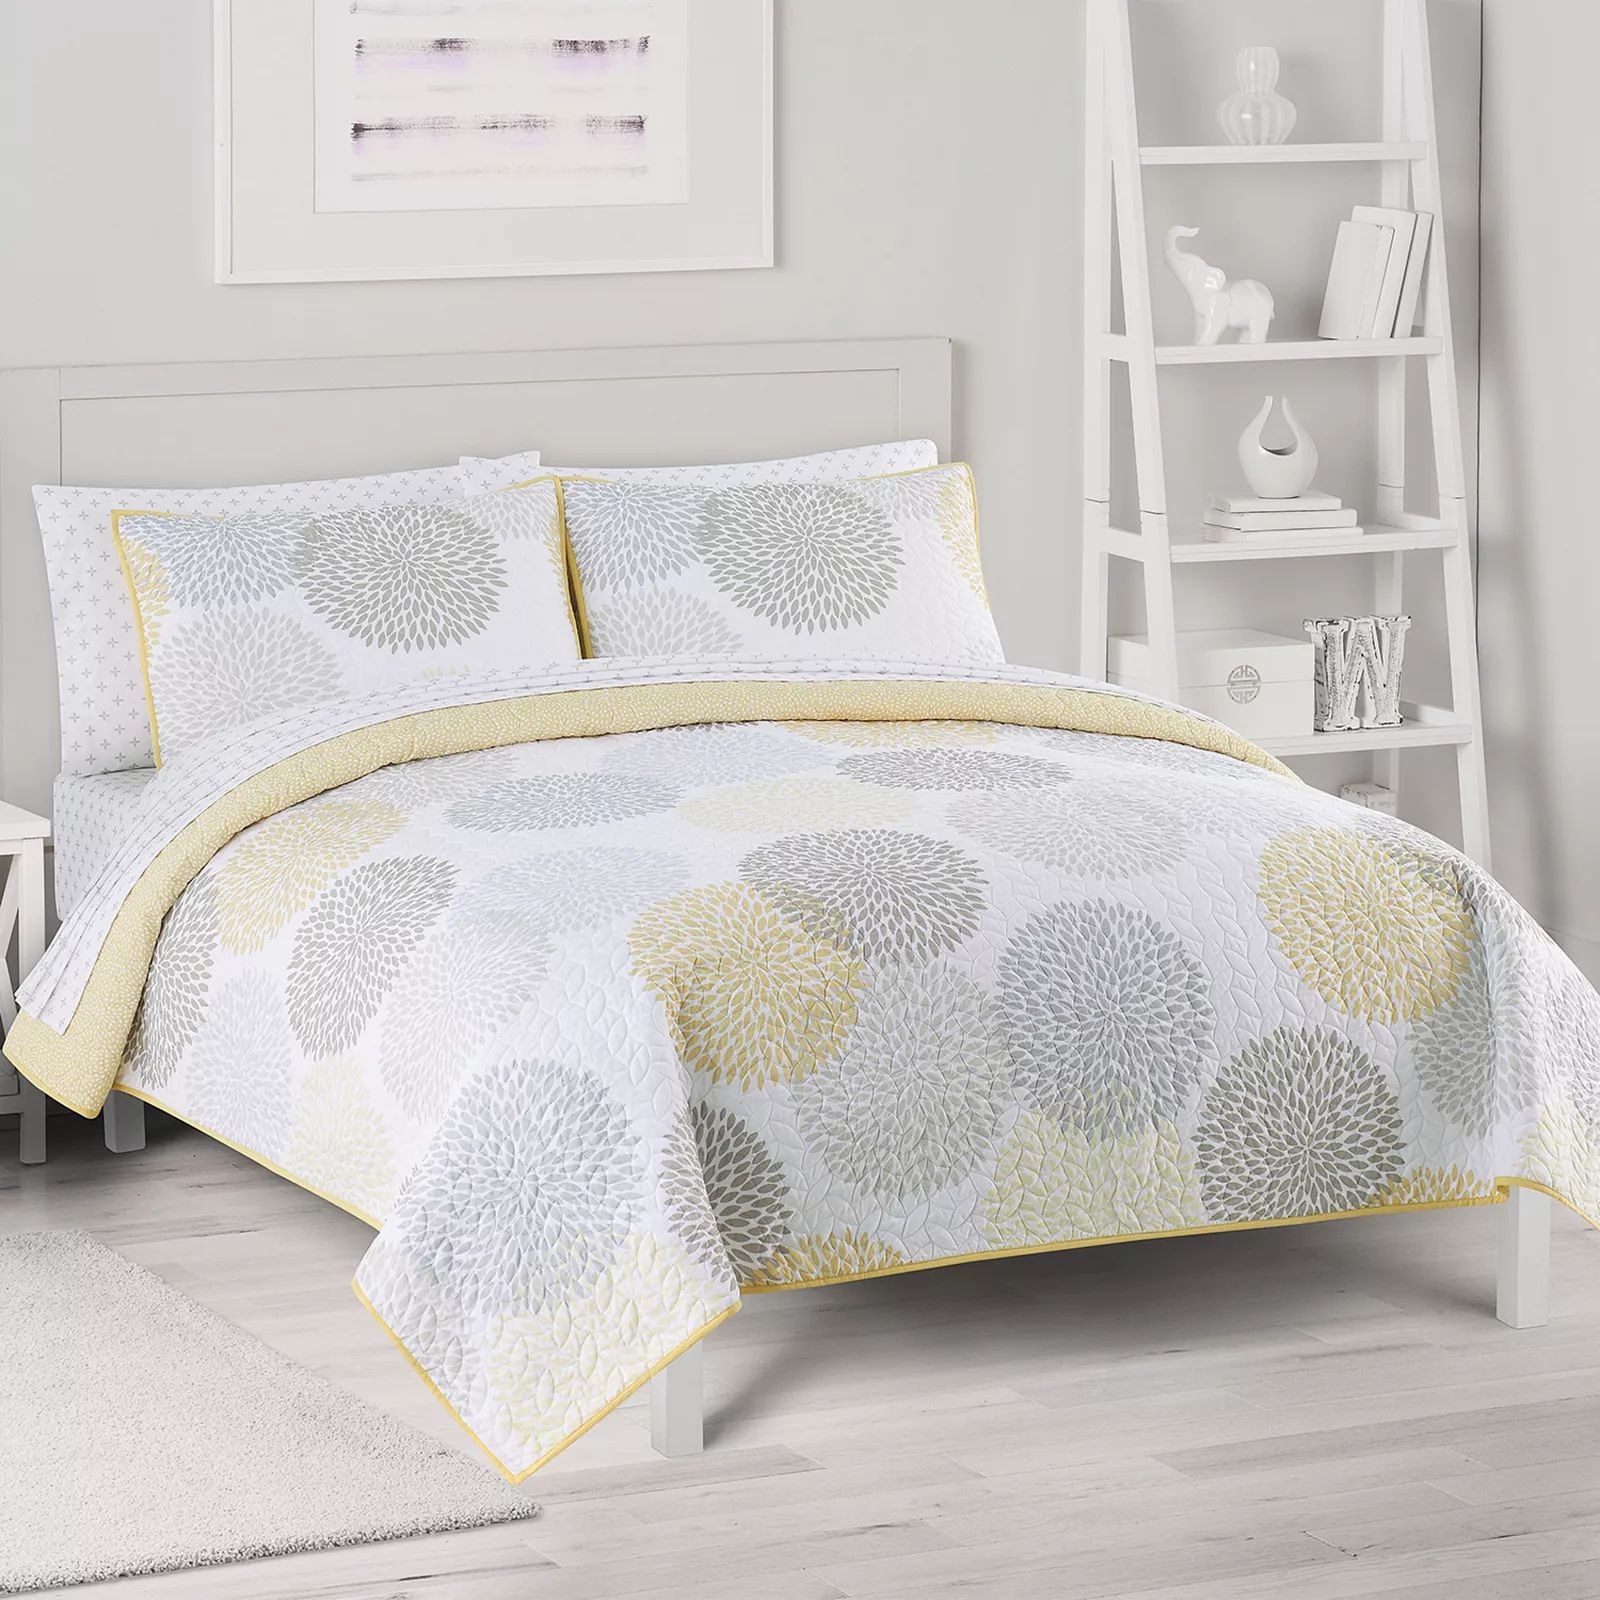 The Big One Reversible Medallion Quilt and Sham Set, Lt Yellow, Full/Queen | Kohl's